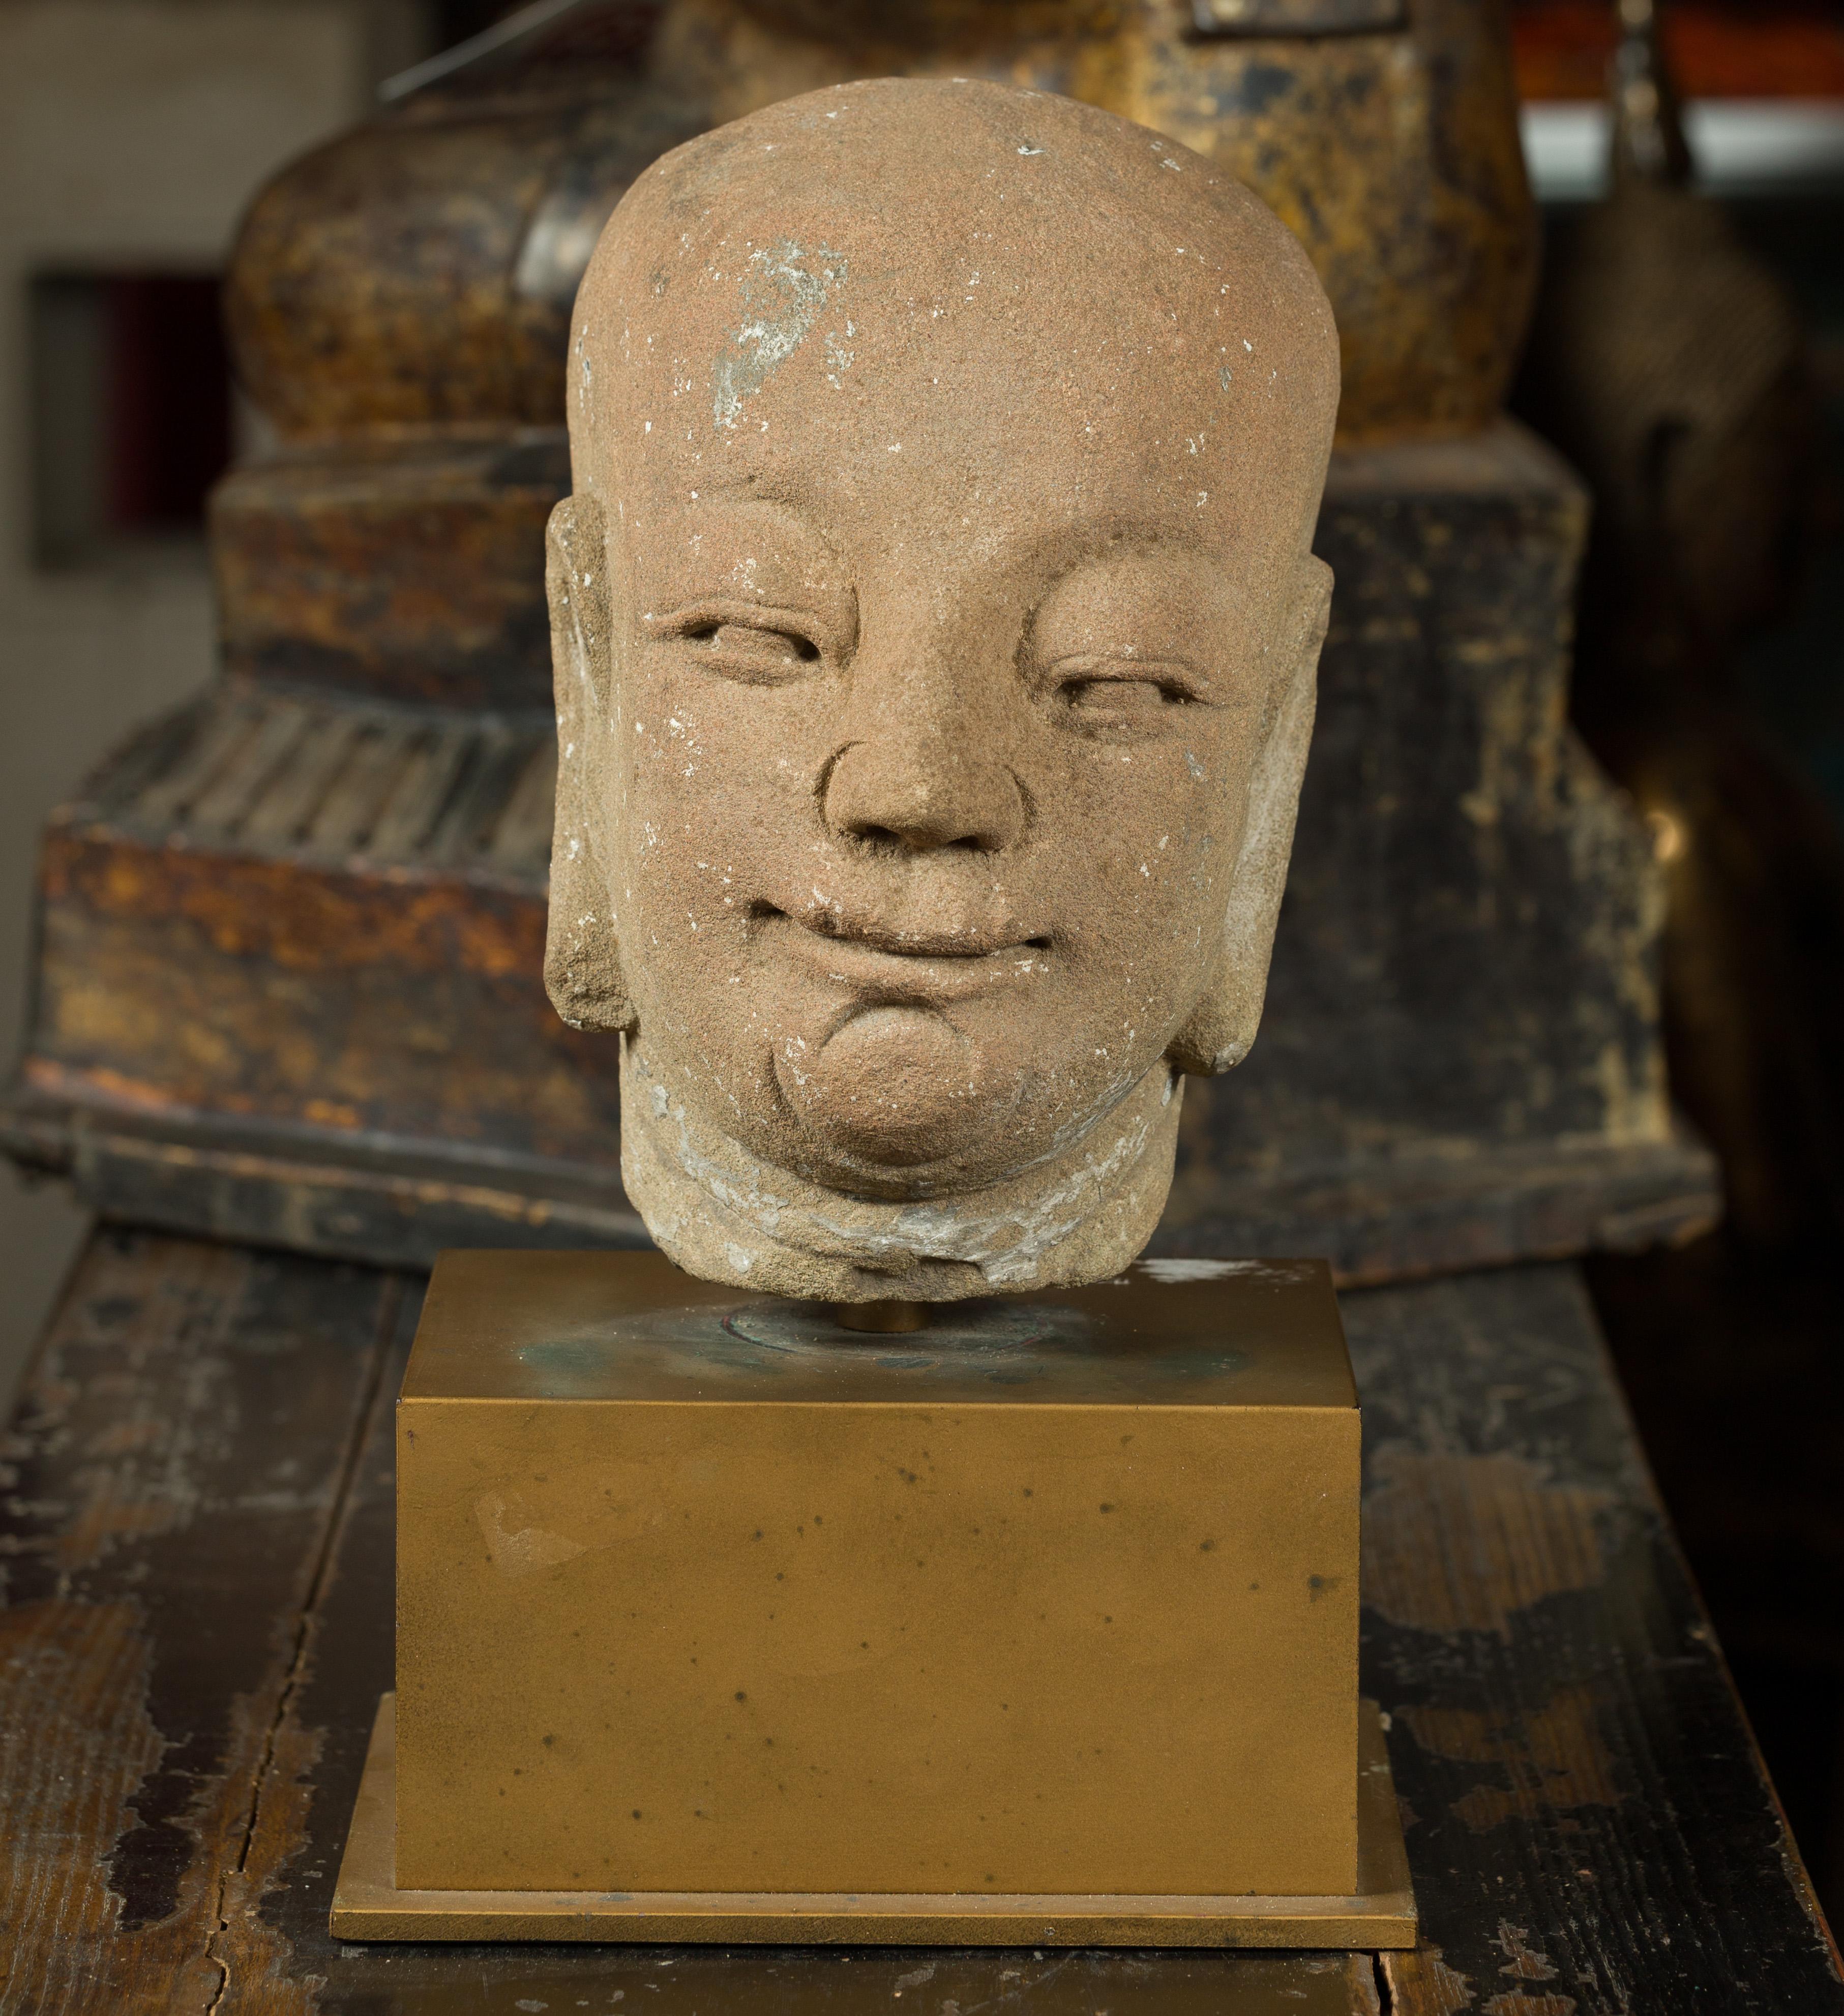 A 17th or 18th century Ming dynasty hand carved head sculpture of a serene Buddhist monk on bronze stand. This head of a Buddhist monk was hand carved in stone during the 17th or 18th century in China, then elegantly mounted on a bronze base. His